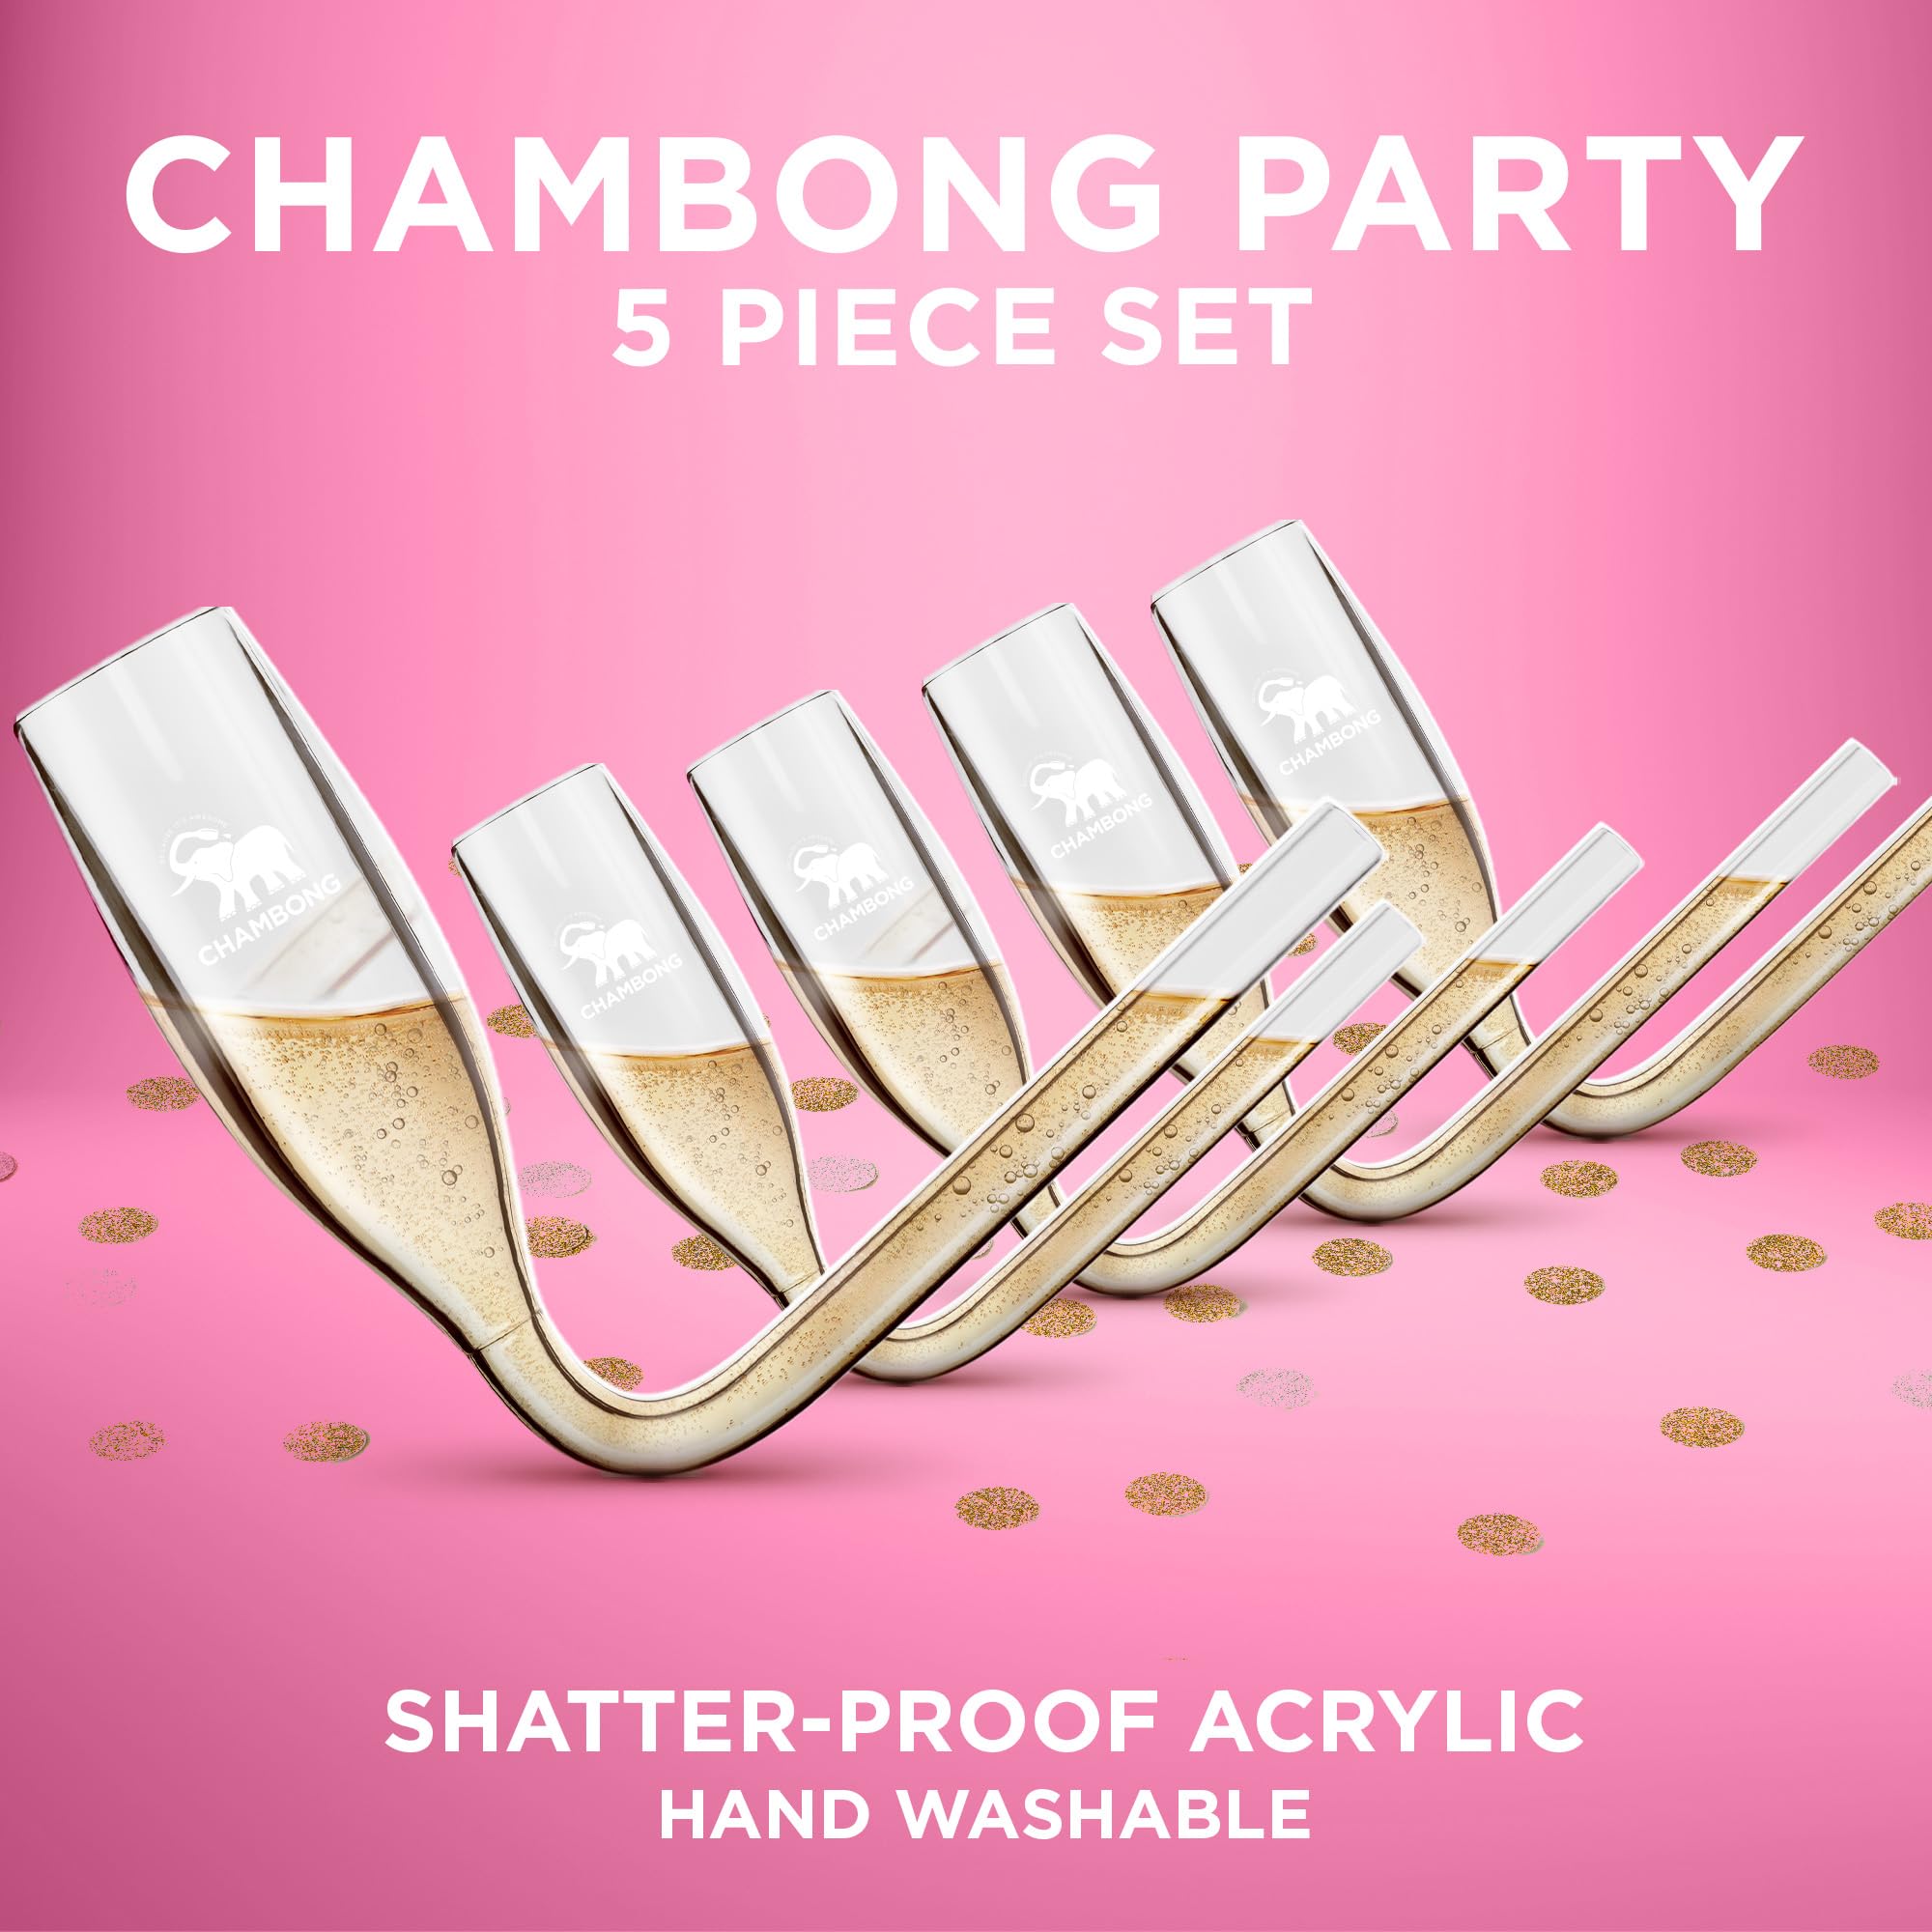 Chambong Party Pack - 5pc Acrylic Set with Gift Box